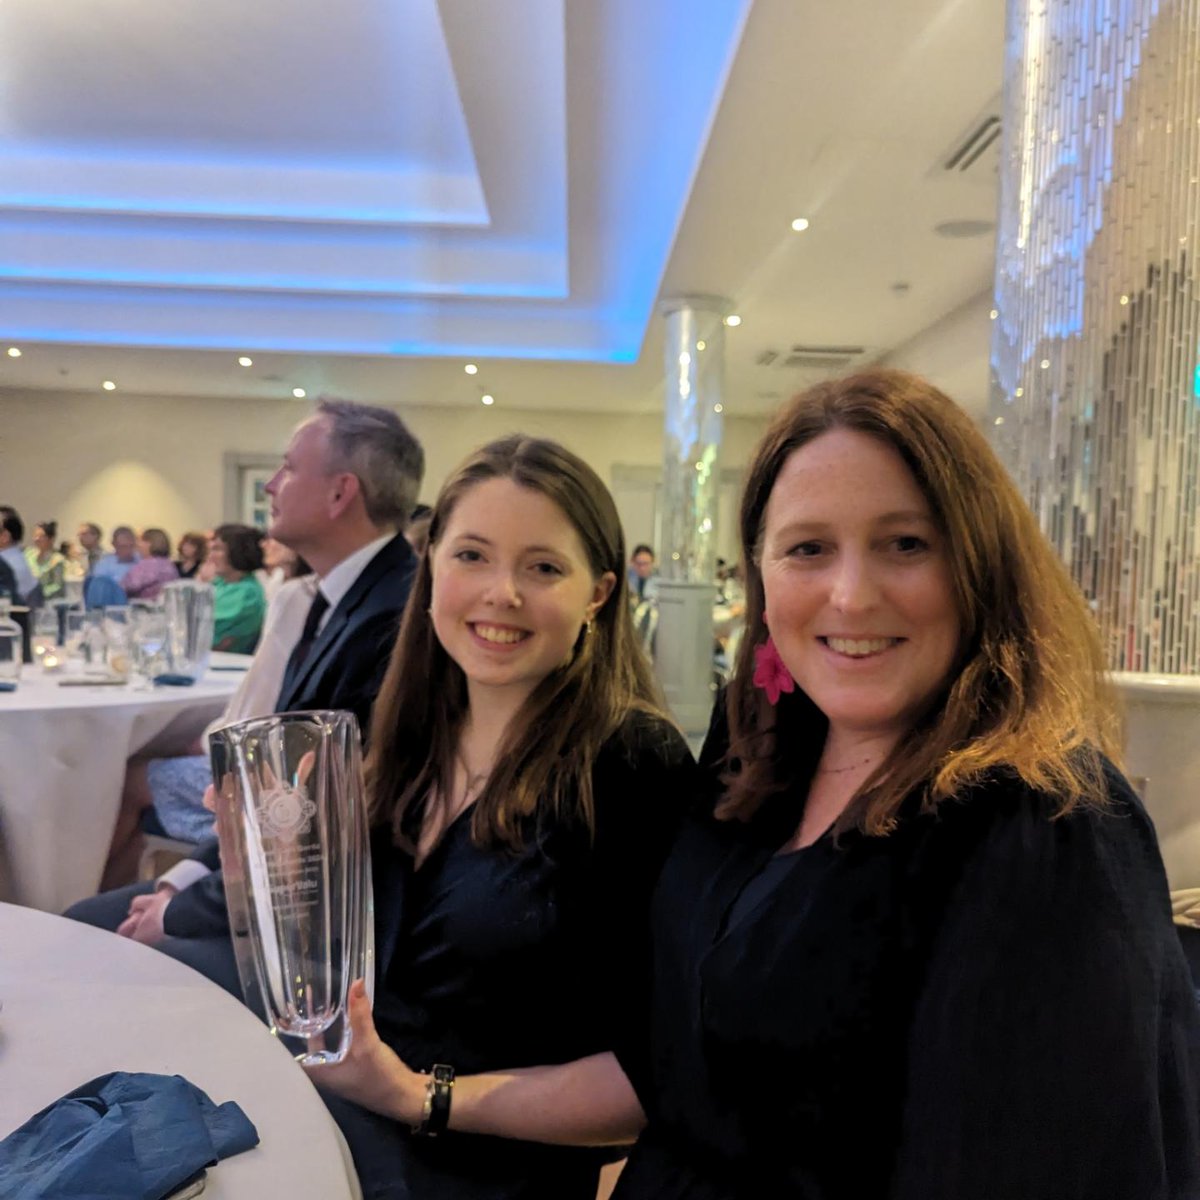 Congratulations to Form 6 student Eve Cave who received an overall winner award at the West Cork Garda Youth Awards 2024 on Friday night. Eve was recognised for her volunteer work with the Girl Guides and contribution to school life. Pictured in Saturday's edition @irishexaminer